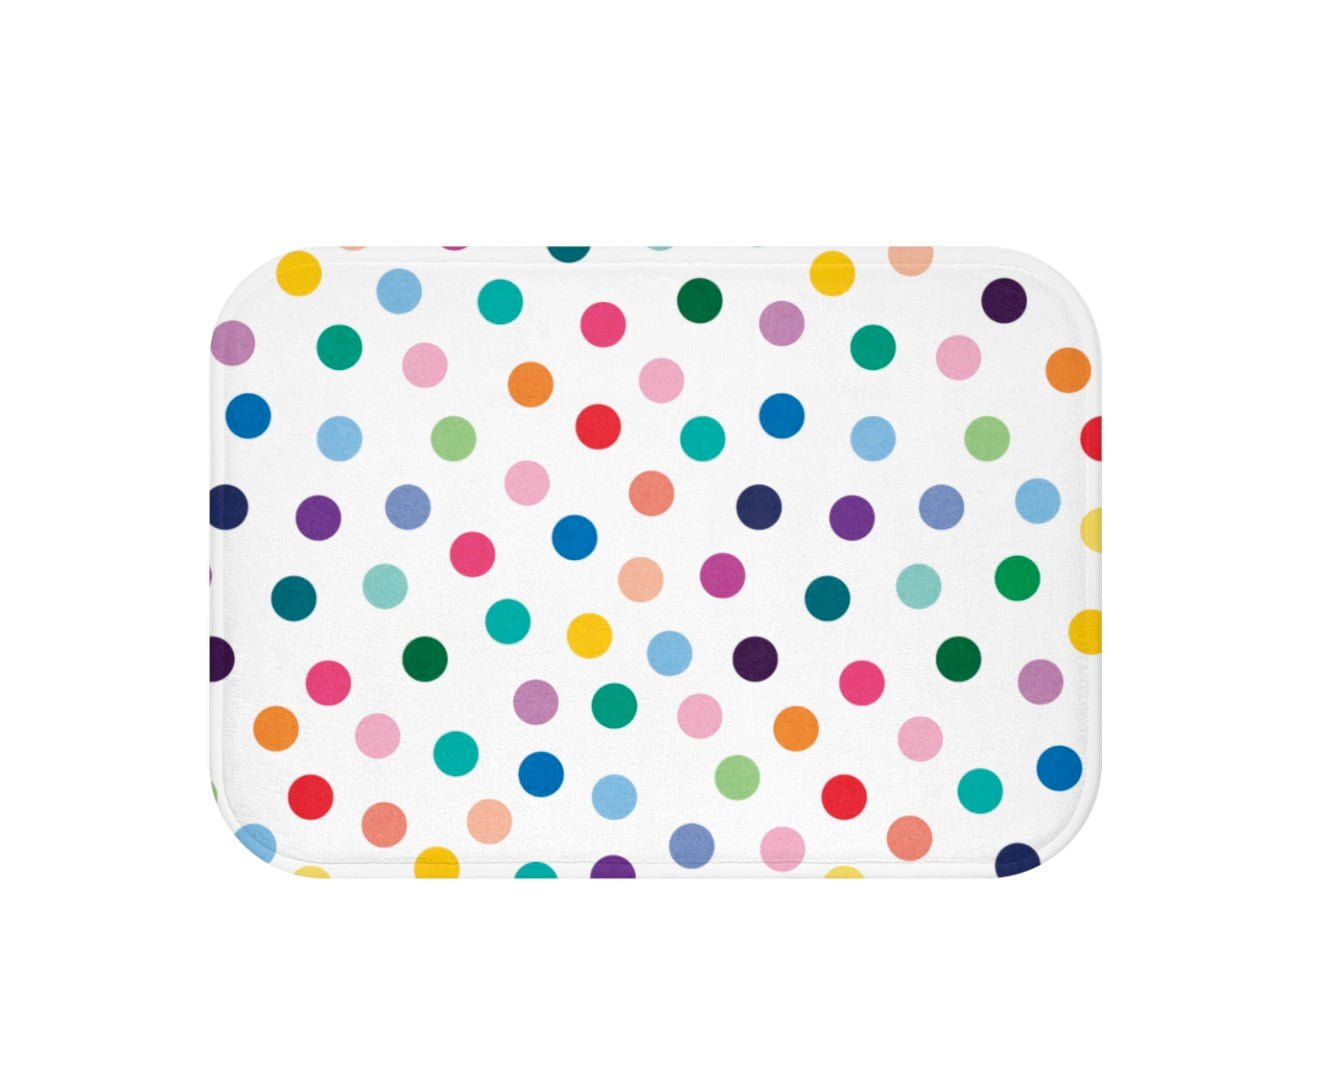 https://www.ozscapedesigns.com/wp-content/uploads/2022/12/kids-bath-mat-with-colorful-polka-dots-3.jpg